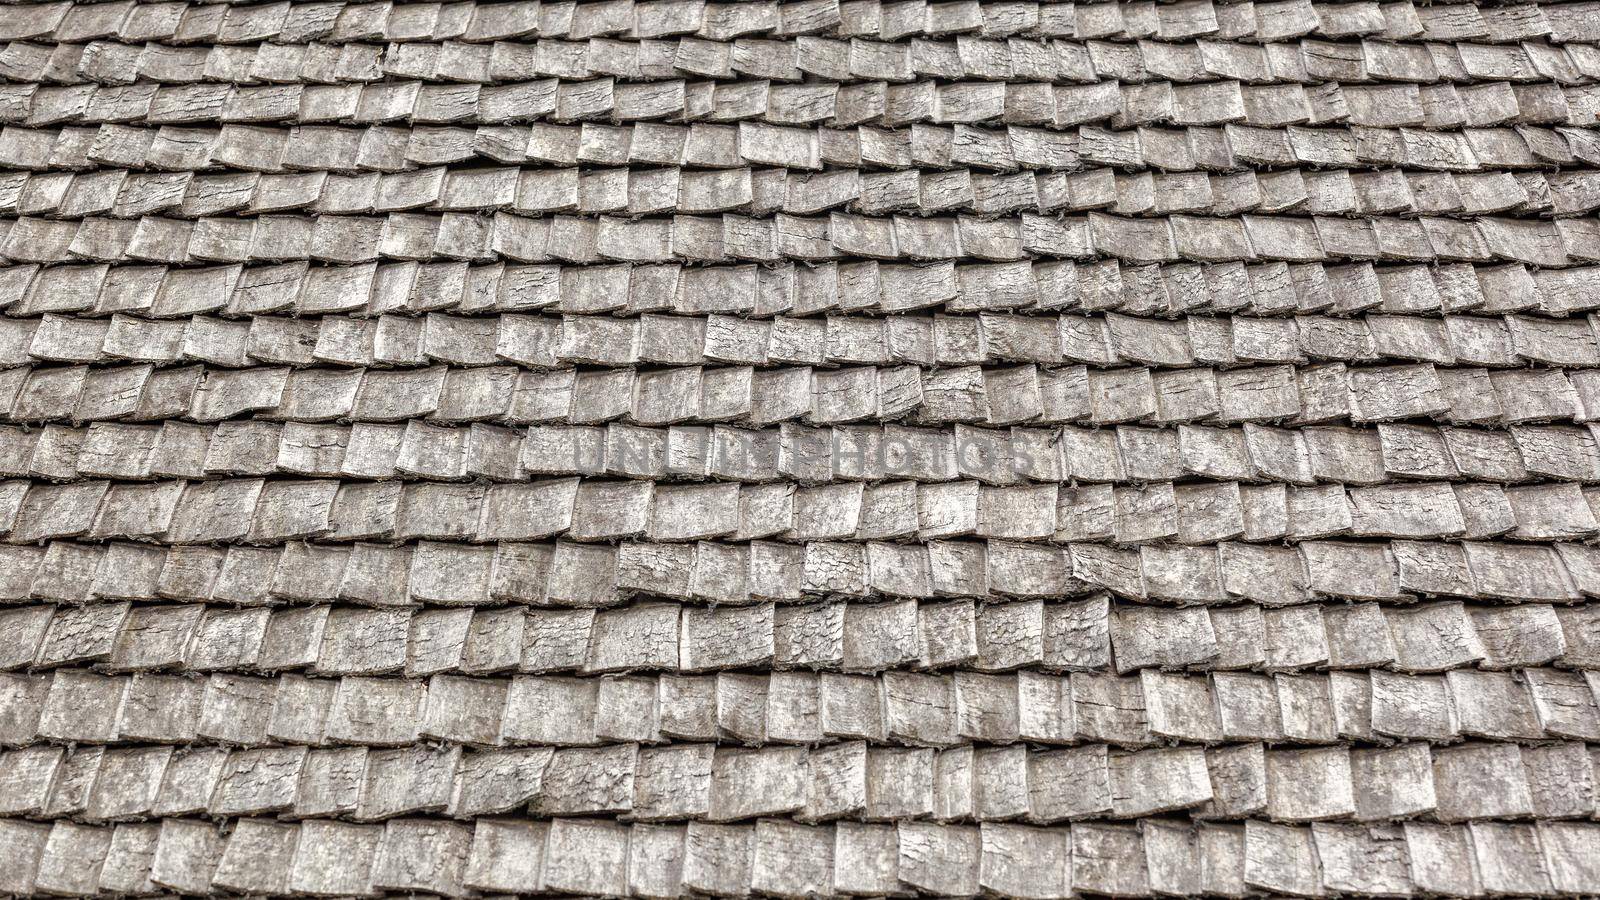 Perspective of wooden tile roof full frame background by Lincikas